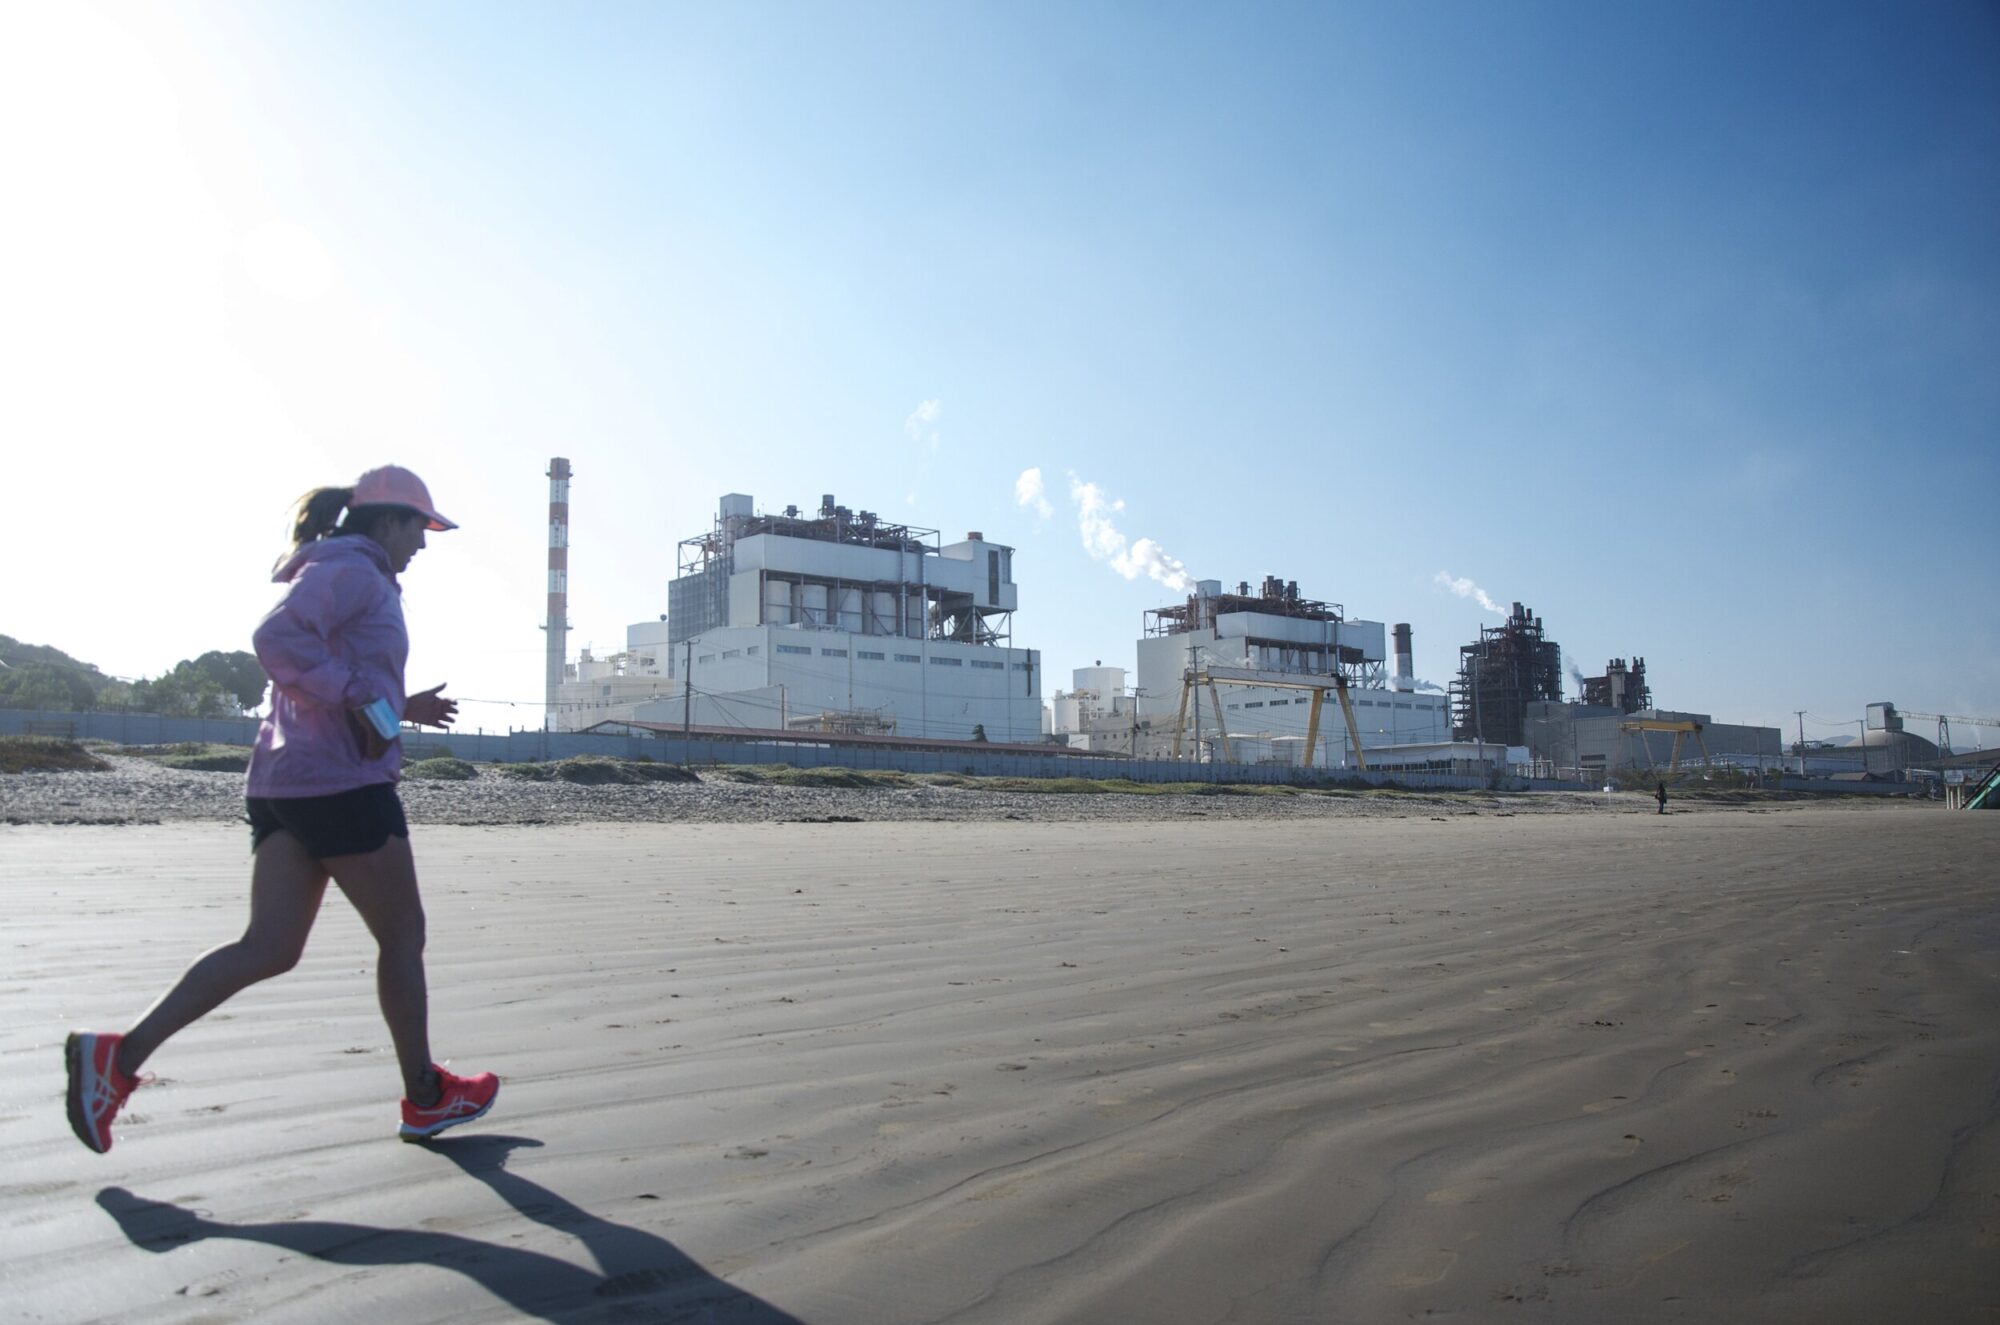 A resident of Quintero and Puchuncaví exercises on the beach, with the industrial park in the background